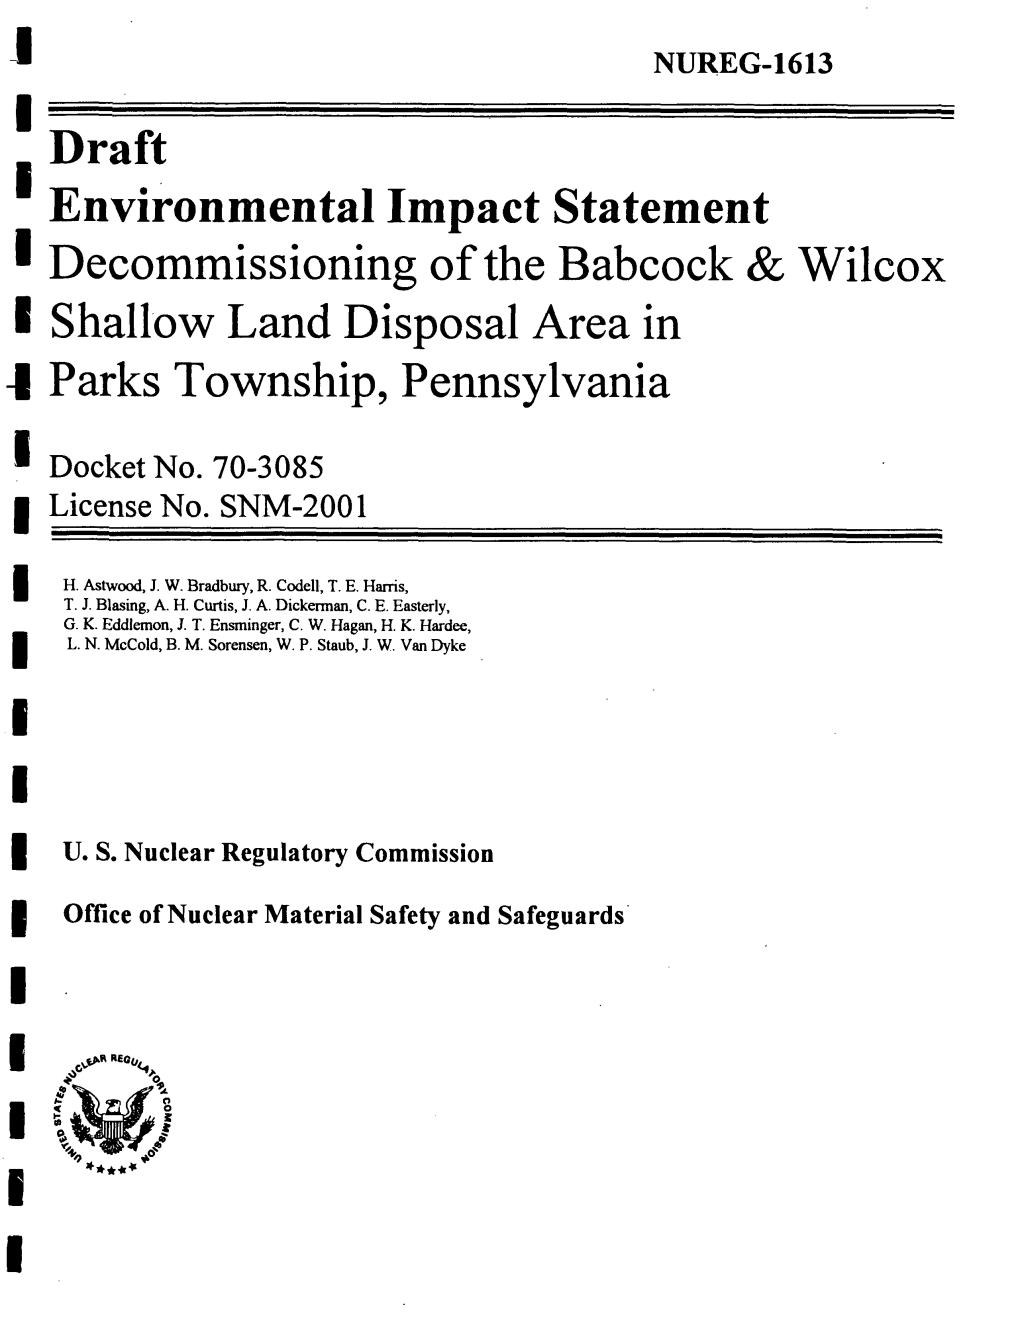 Draft Environmental Impact Statement. Decommissioning of The